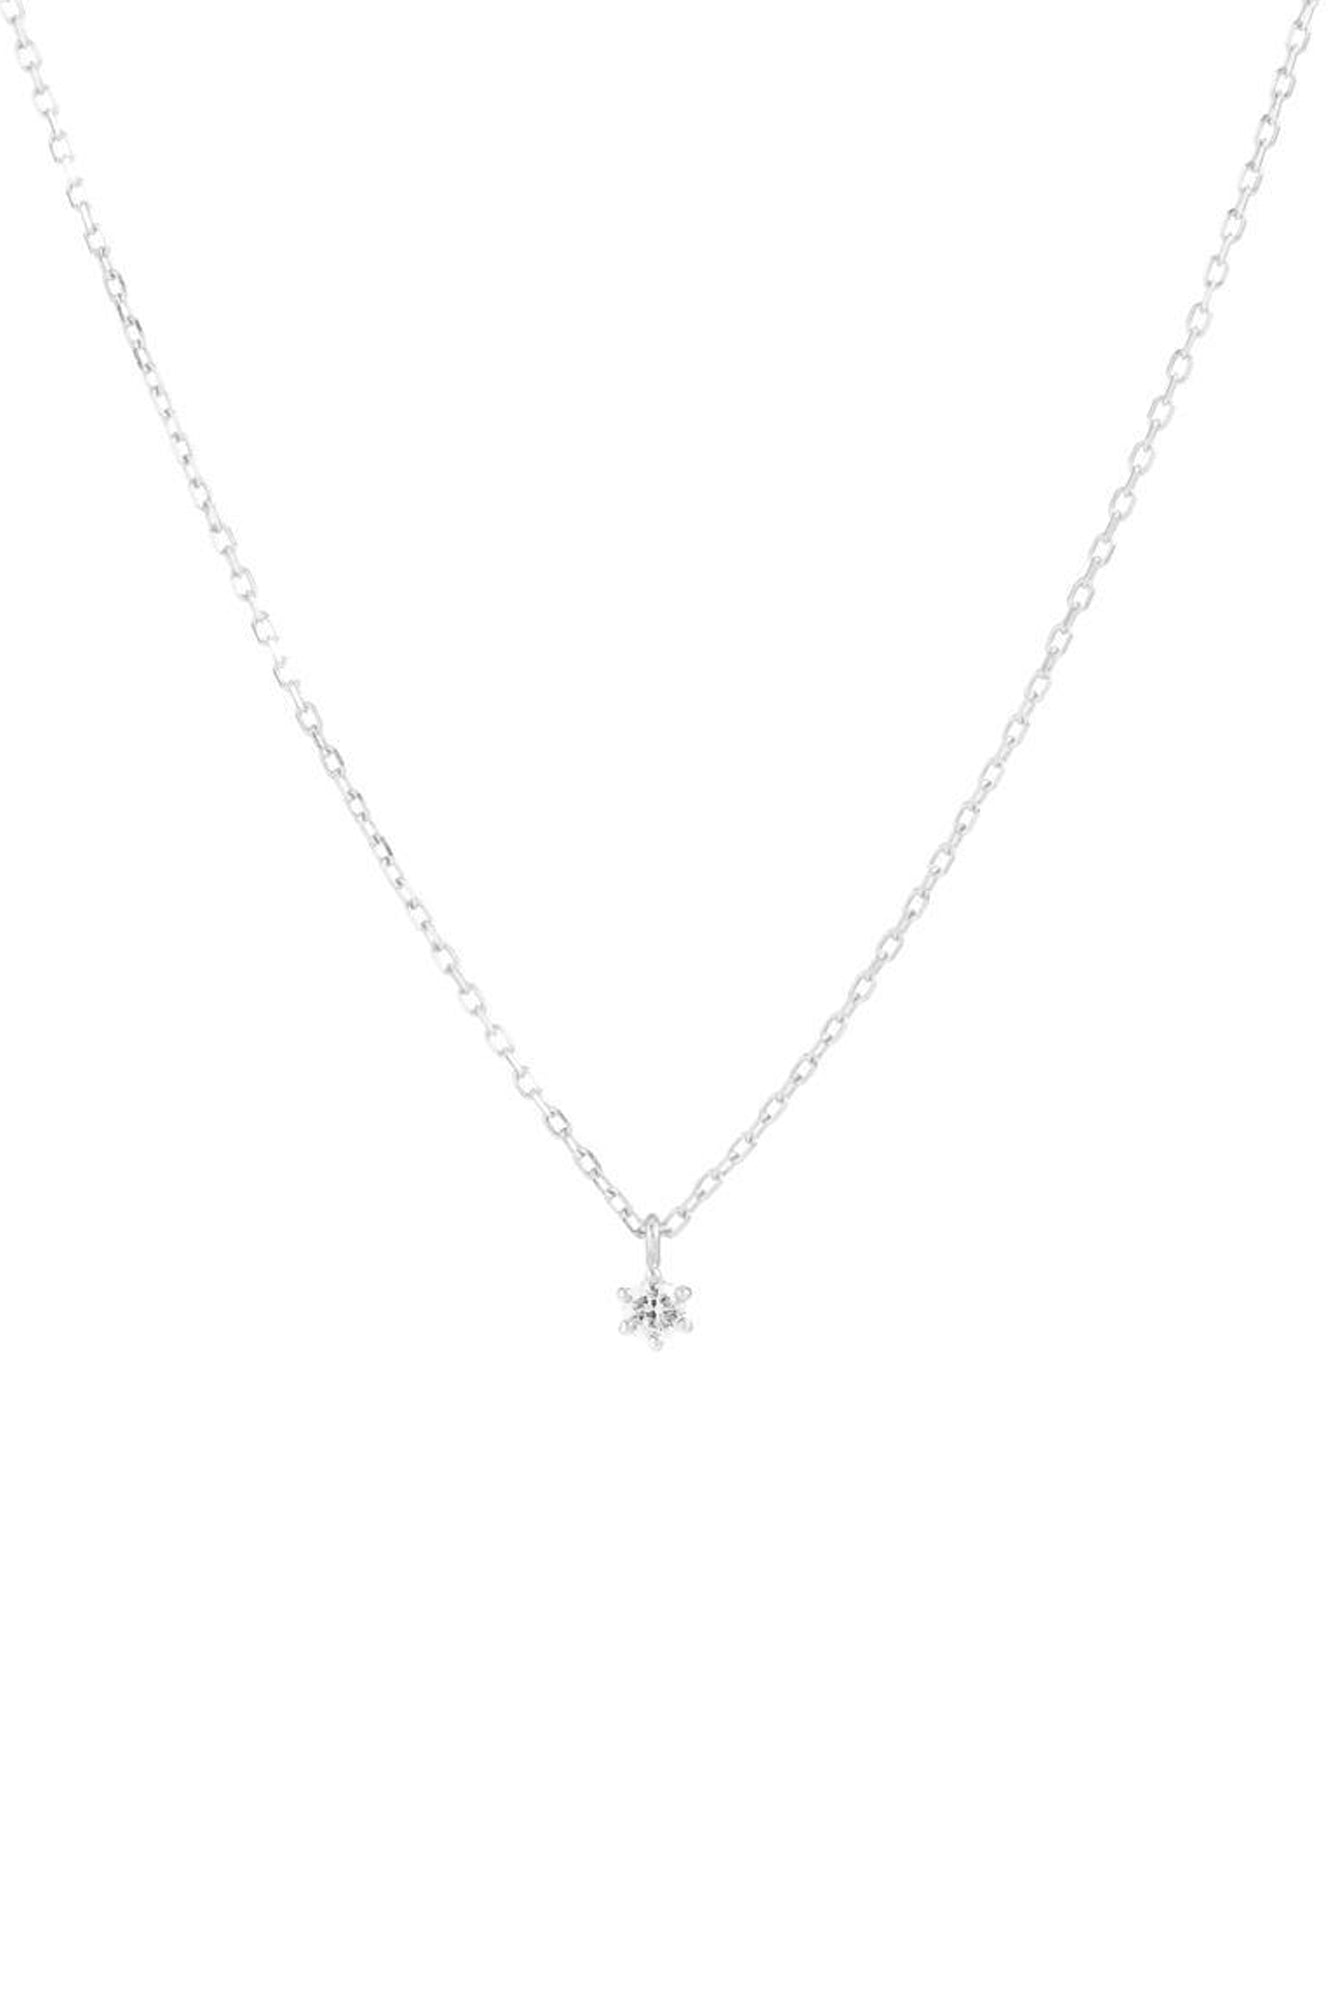 14k White Gold Sweet Droplet Diamond Necklace